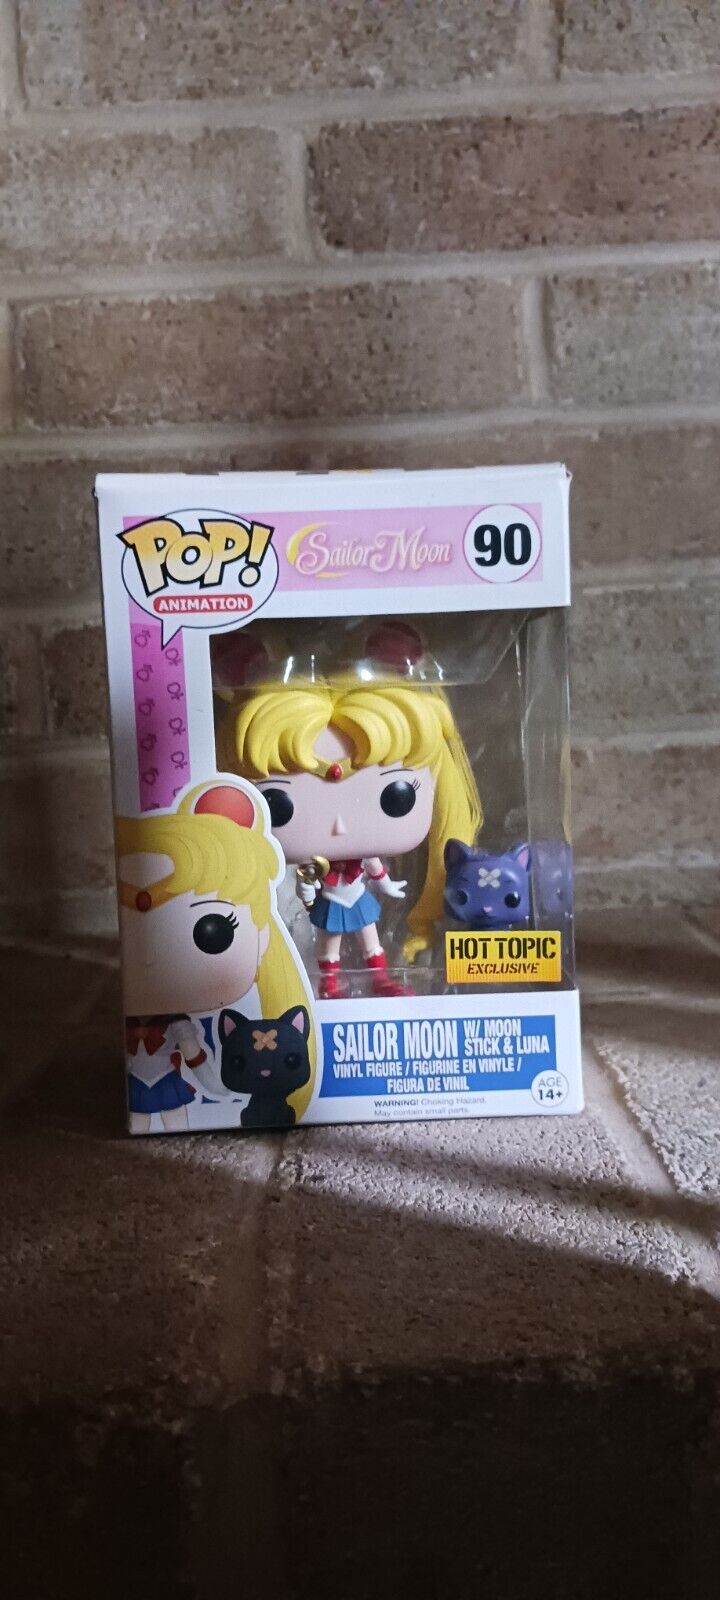 Sailor moon with moon stick & luna funko pop (hot topic exclusive)